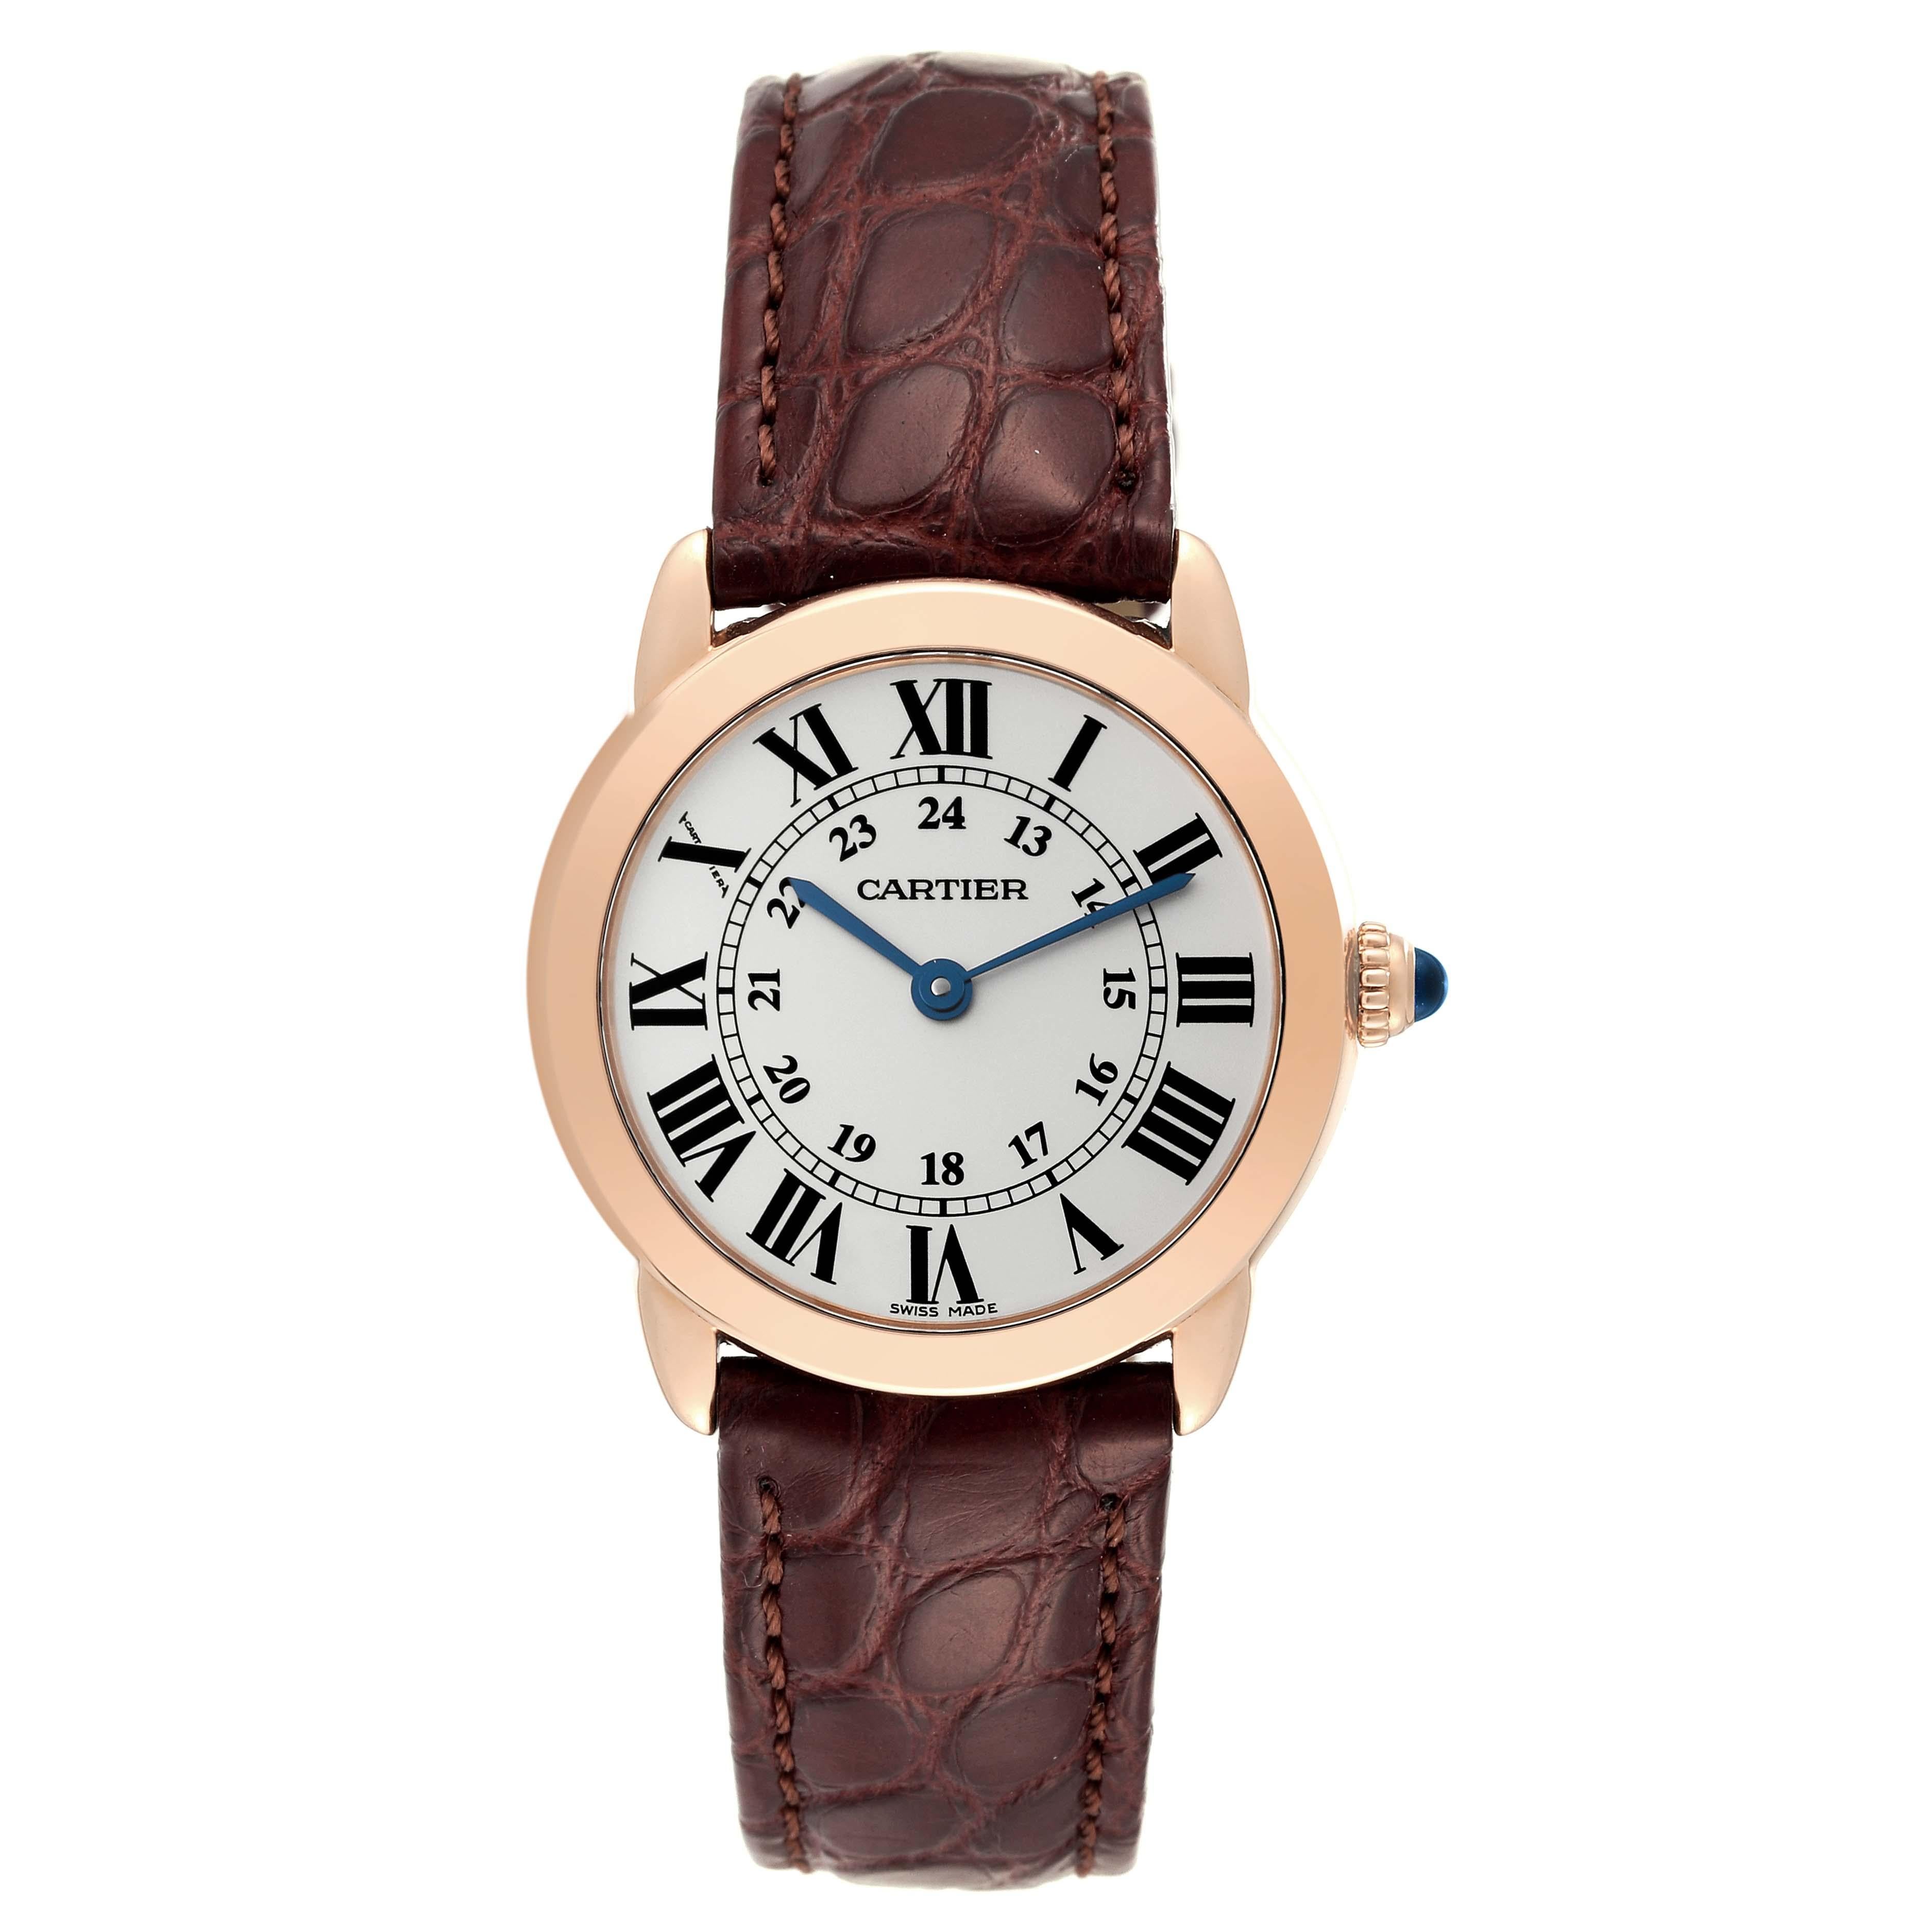 Cartier Ronde Solo Steel Rose Gold Small Ladies Watch W6701007 Card. Quartz movement. 18K rose gold case 29.0 mm in diameter. Stainless steel caseback. Case thikness 6.35 mm. Circular grained crown set with the blue spinel cabochon. . Scratch